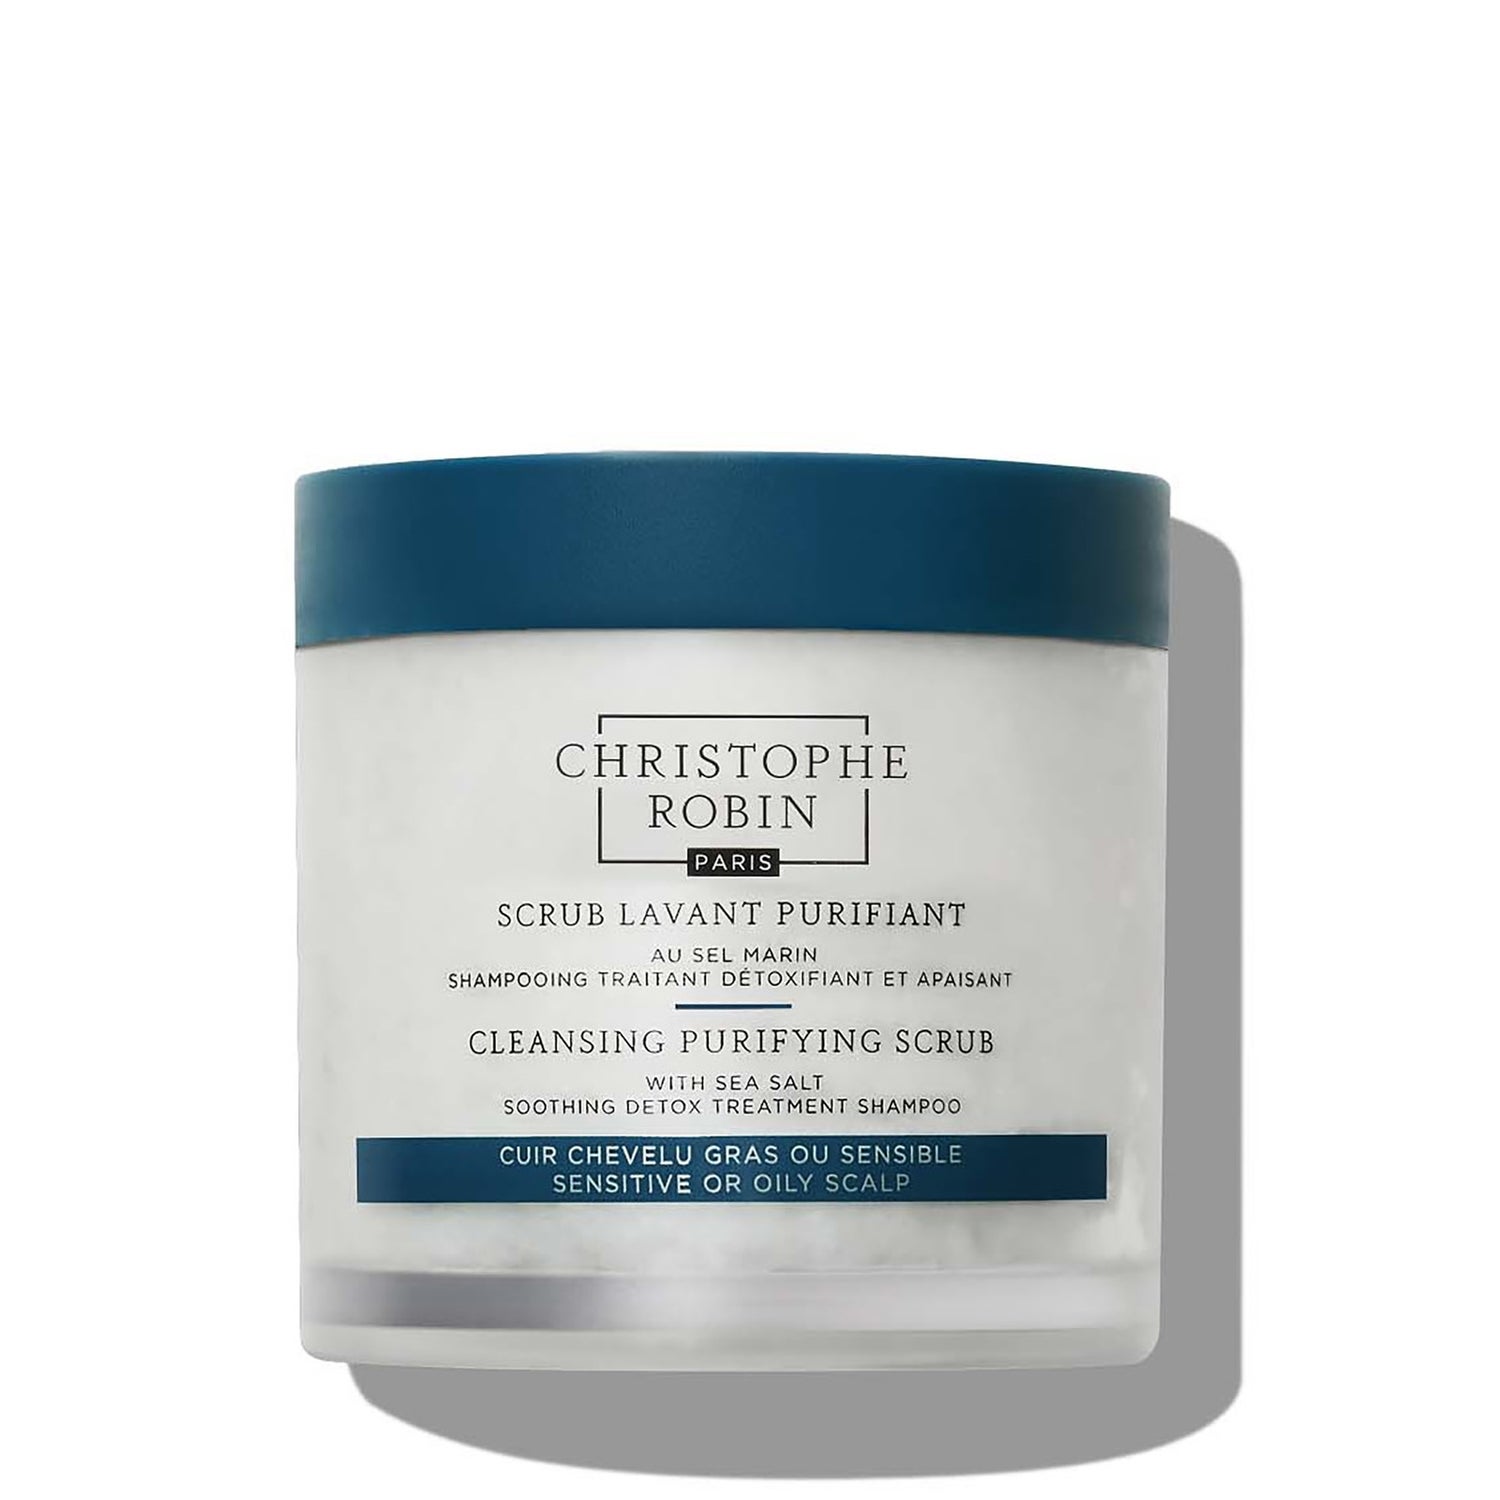 Christophe Robin Cleansing Purifying Scrub with Sea Salt 250ml (Low Dioxane)